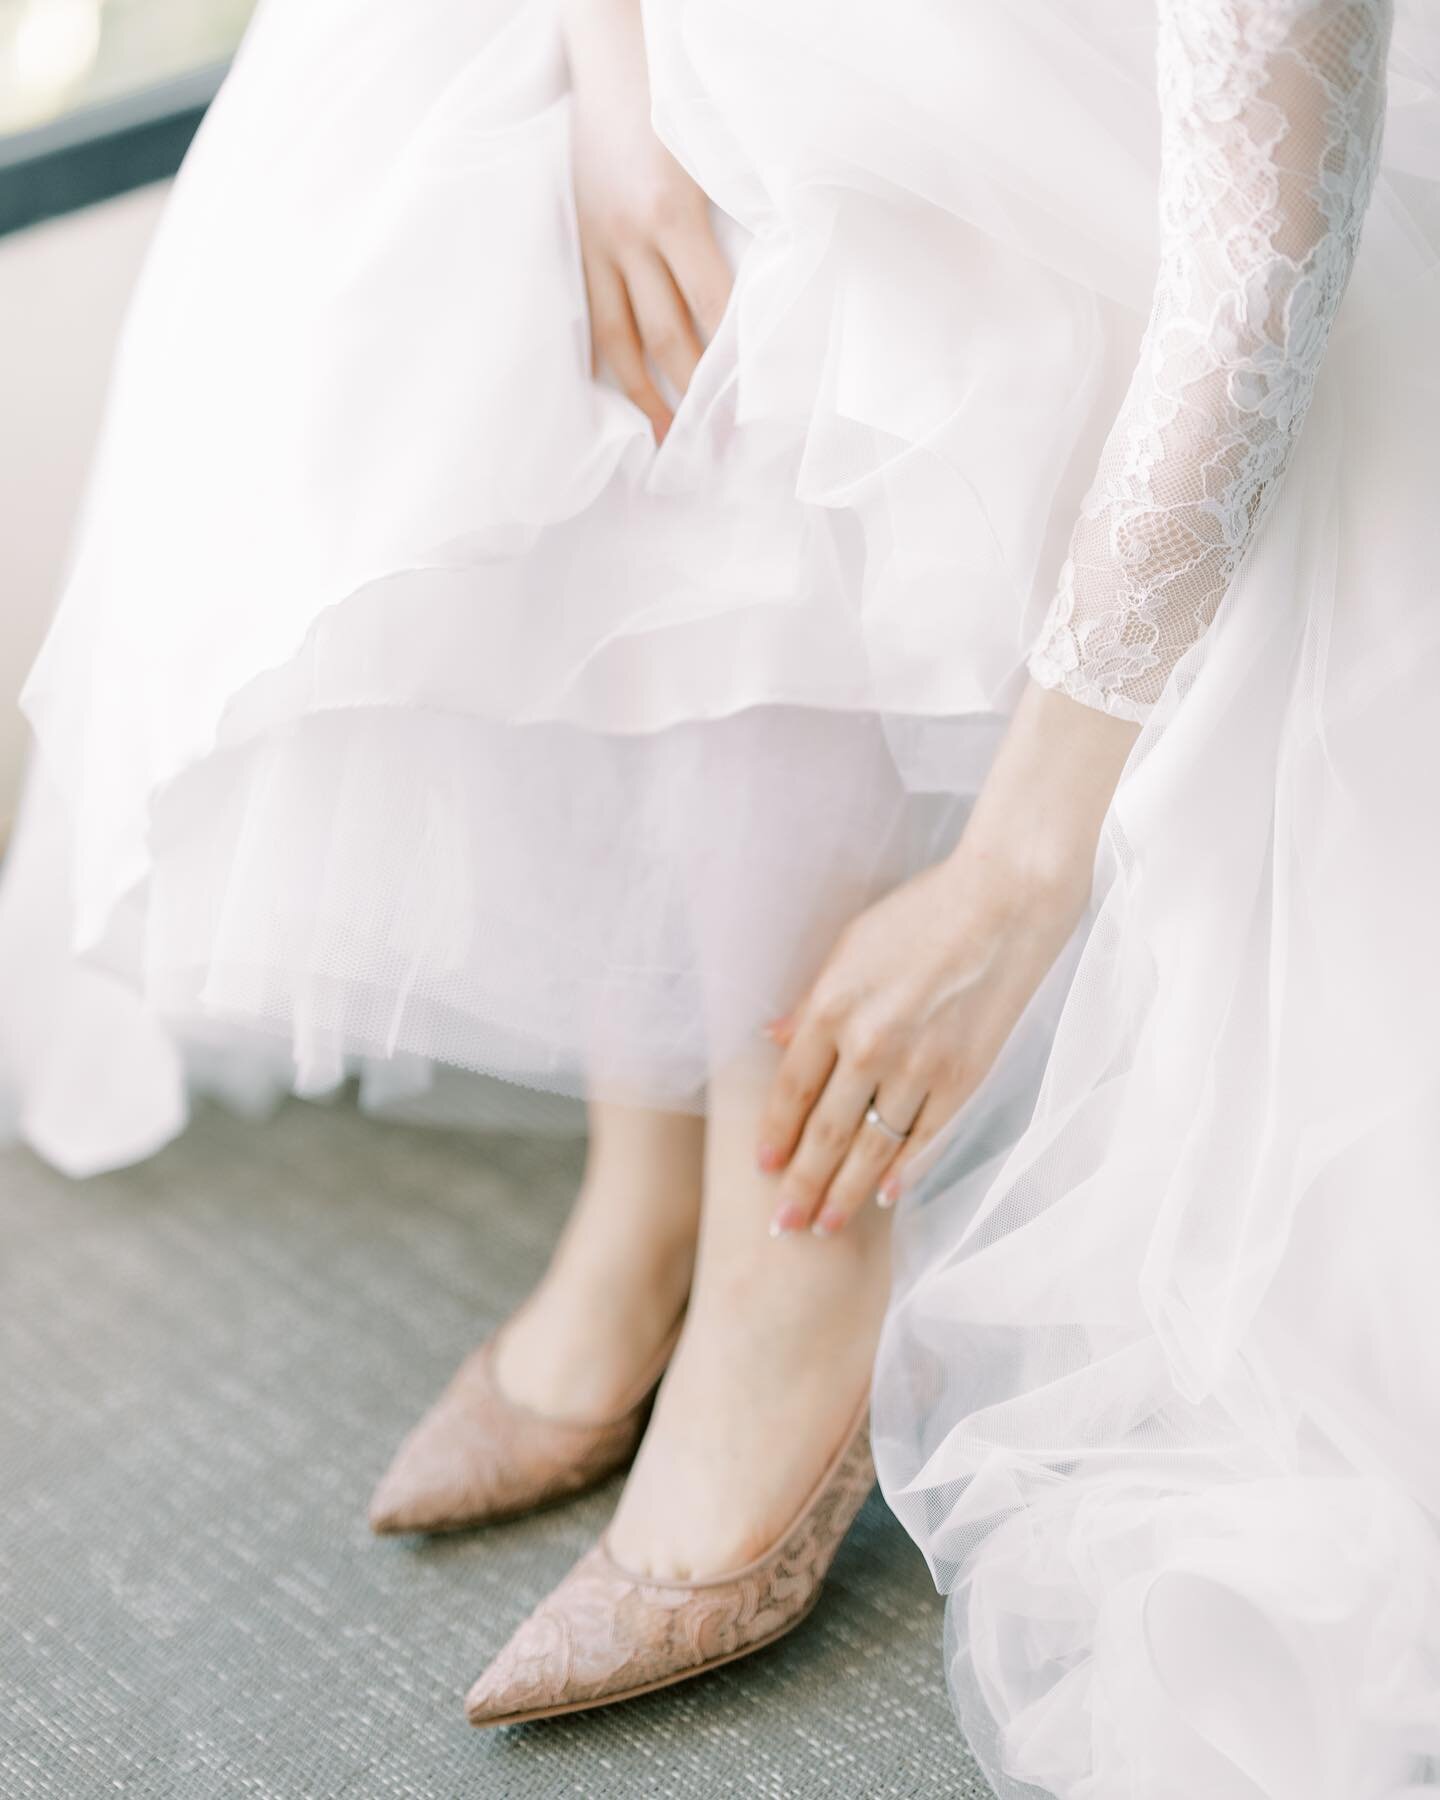 Details are not details, they make the story. A little sneak peek for this fairytale bride of mine who is as obsessed with details as I am. ✨
.
.
.
.
.

#oregonwedding #mauiwedding #hawaiiwedding #mauibride #mauiweddingphotographer 
#oregonbride #por